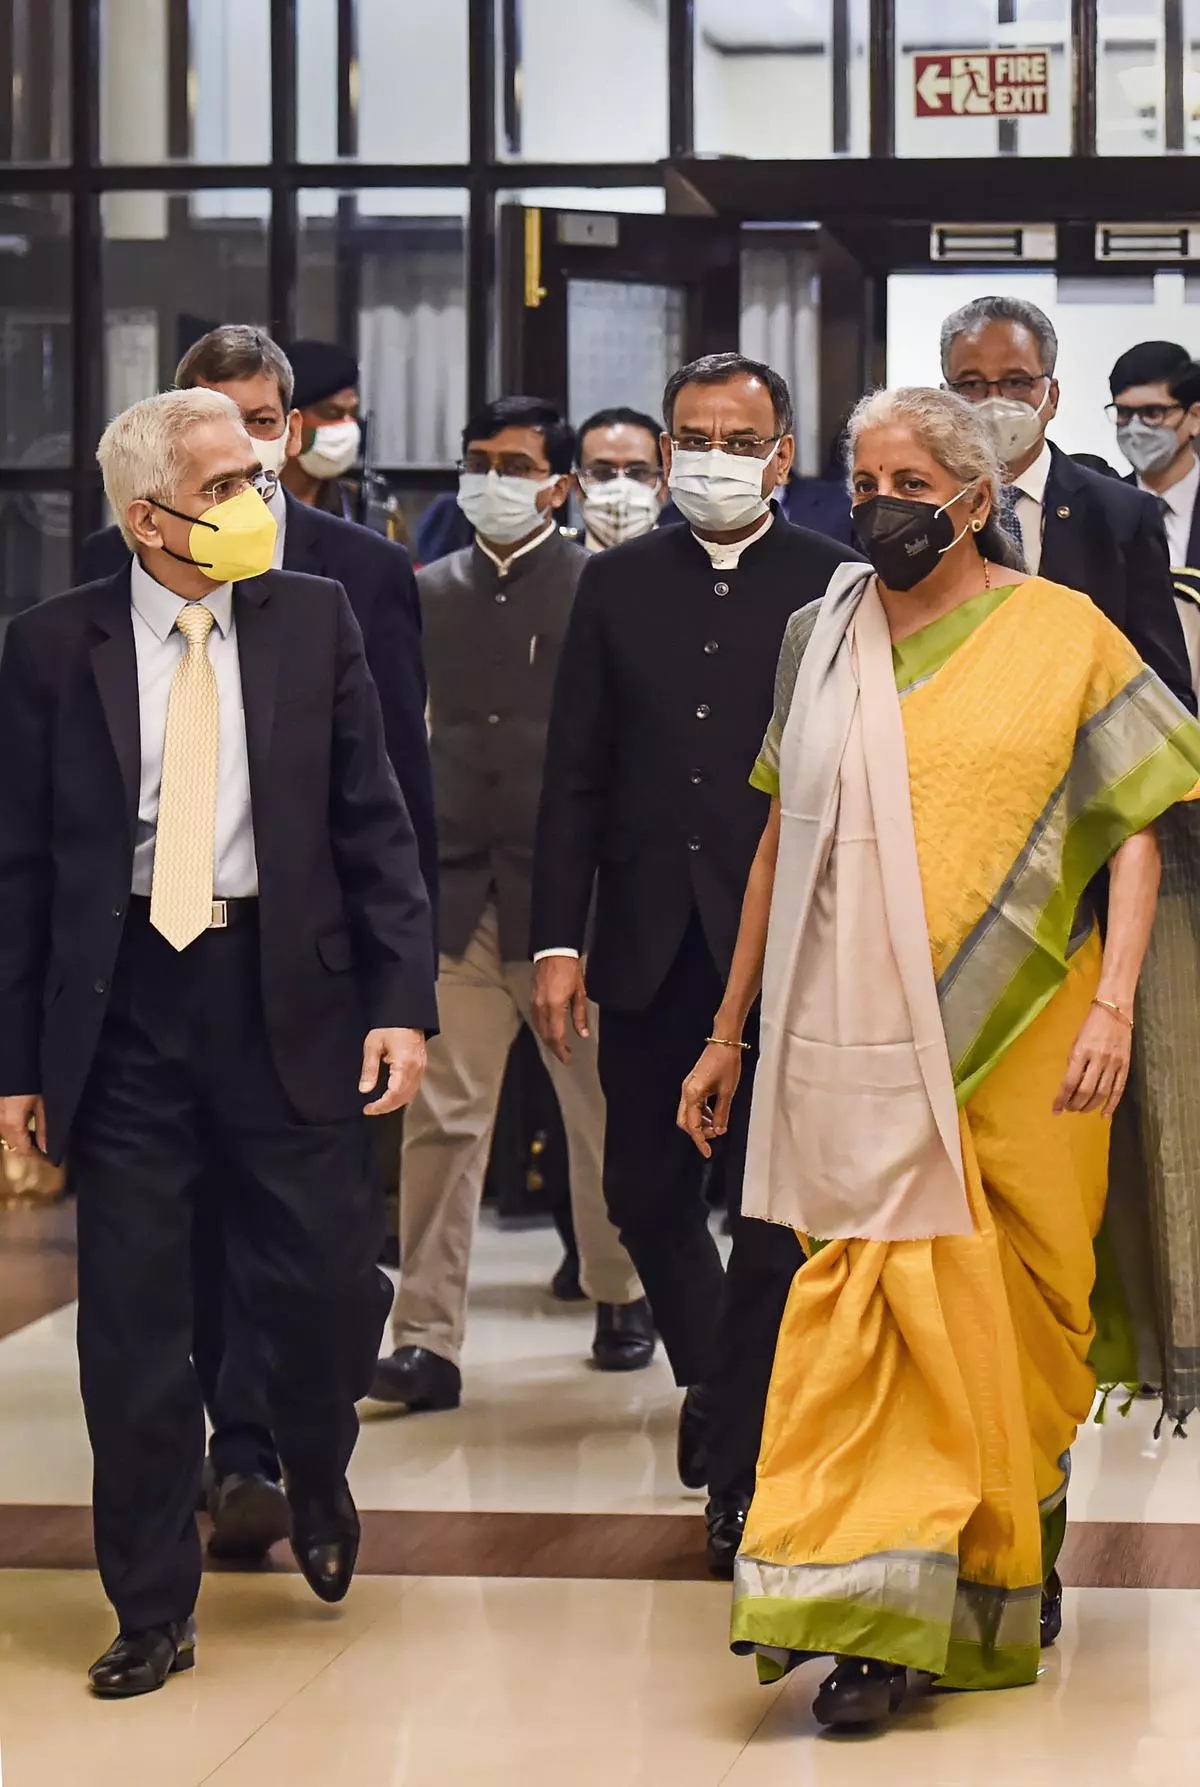 Union Finance Minister Nirmala Sitharaman and Reserve Bank of India (RBI) Governor Shaktikanta Das arrive for the post-Budget meeting of the RBI Central Board in New Delhi on Monday 